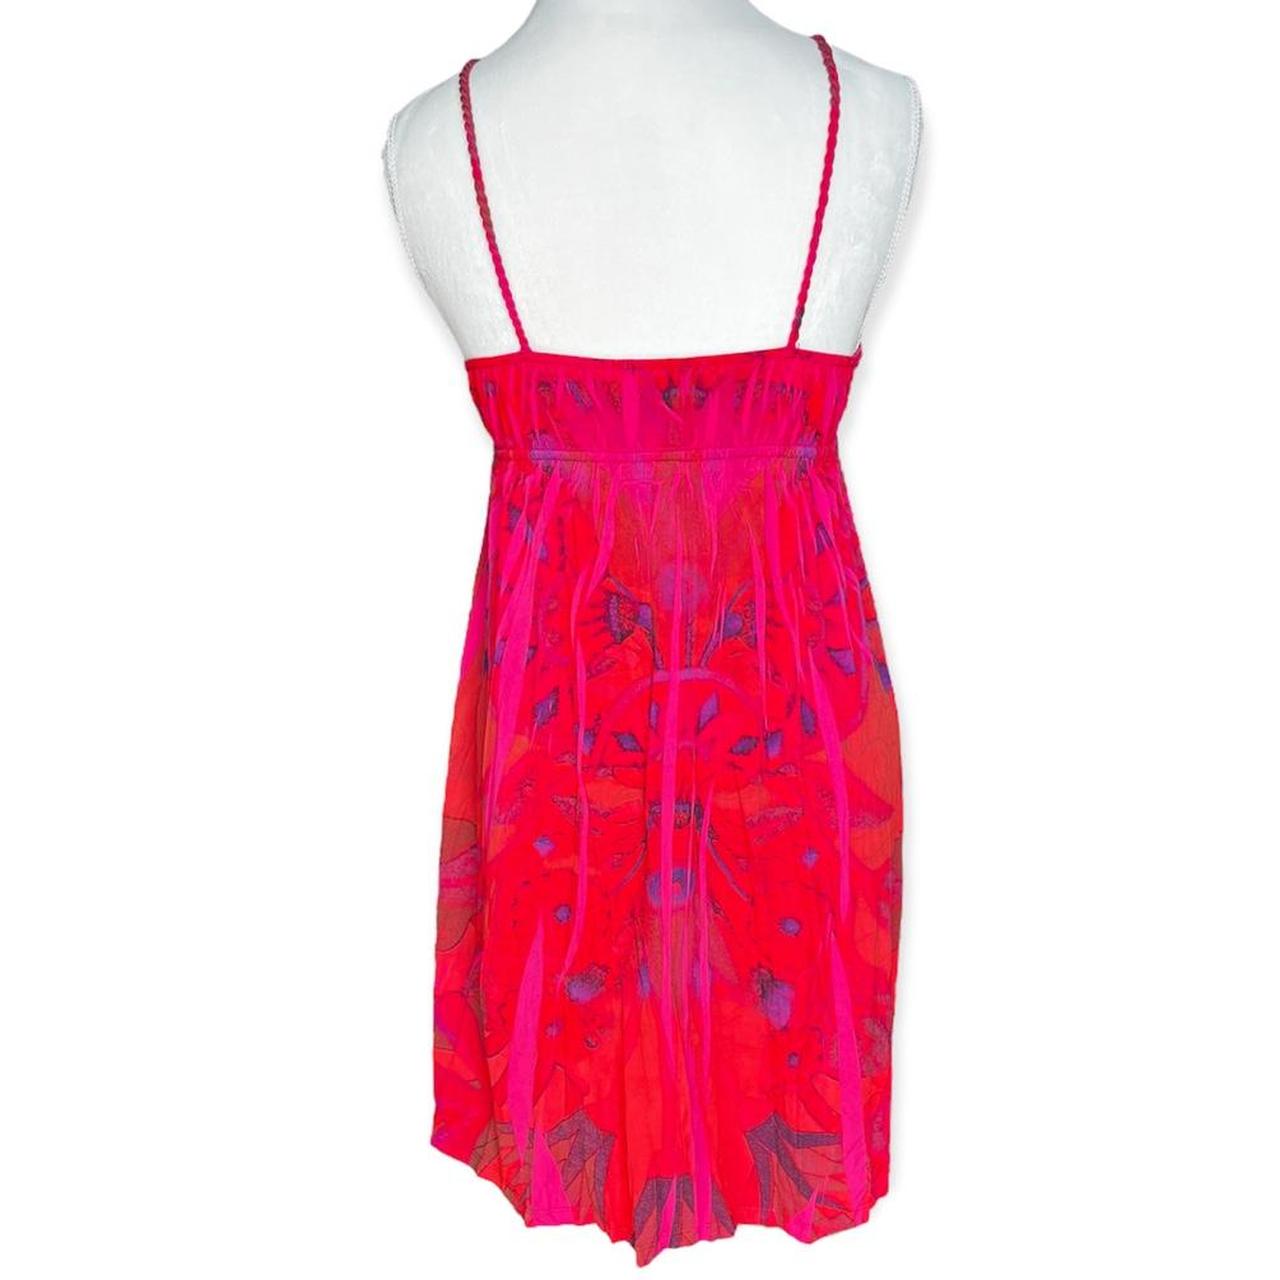 Snap Sights Women's Red and Pink Dress (2)